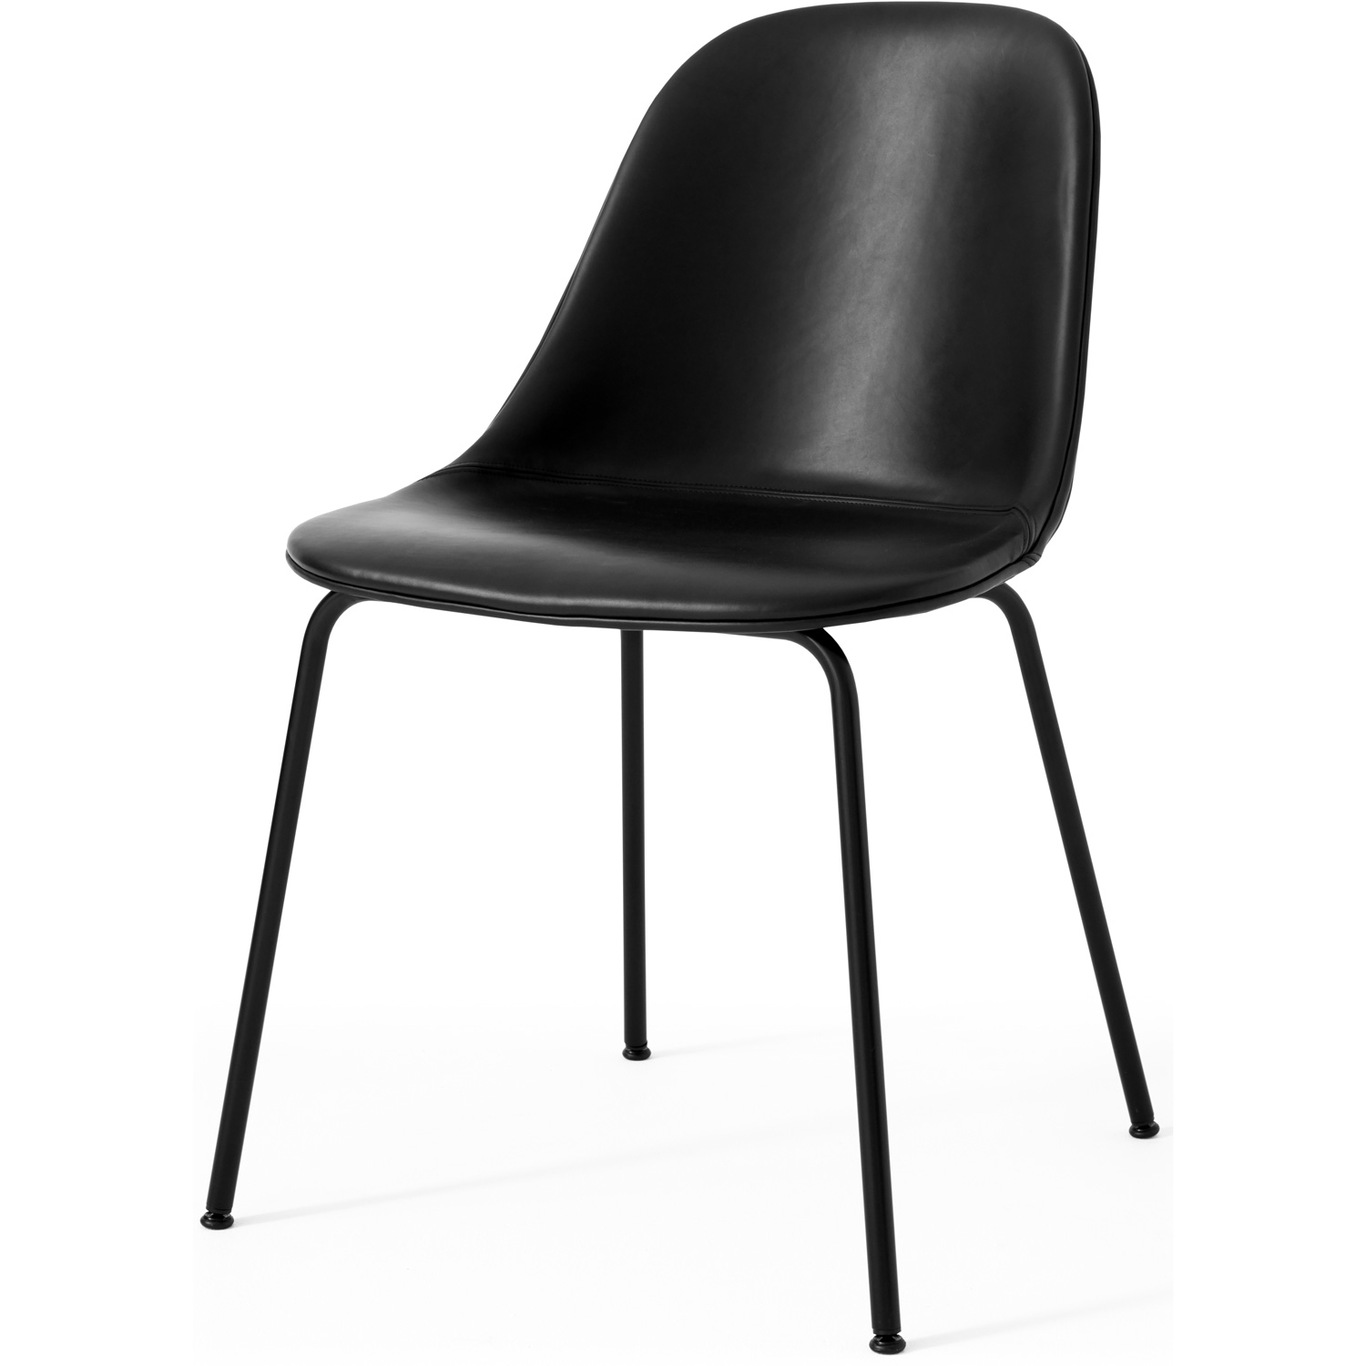 Harbour Chair, Black Leather